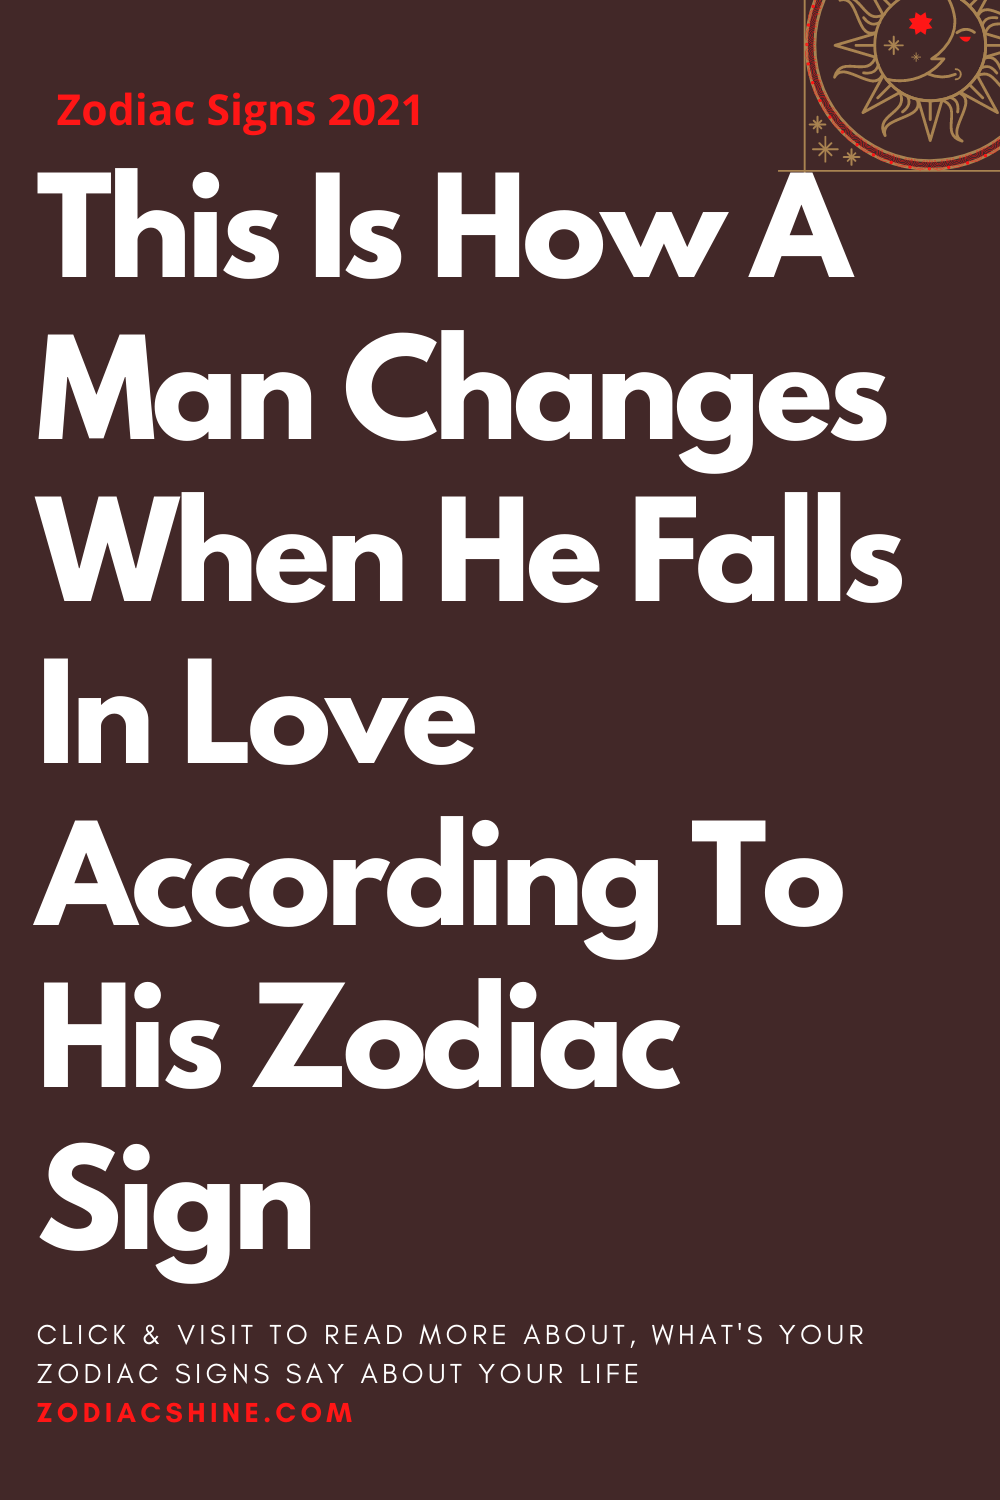 This Is How A Man Changes When He Falls In Love According To His Zodiac Sign